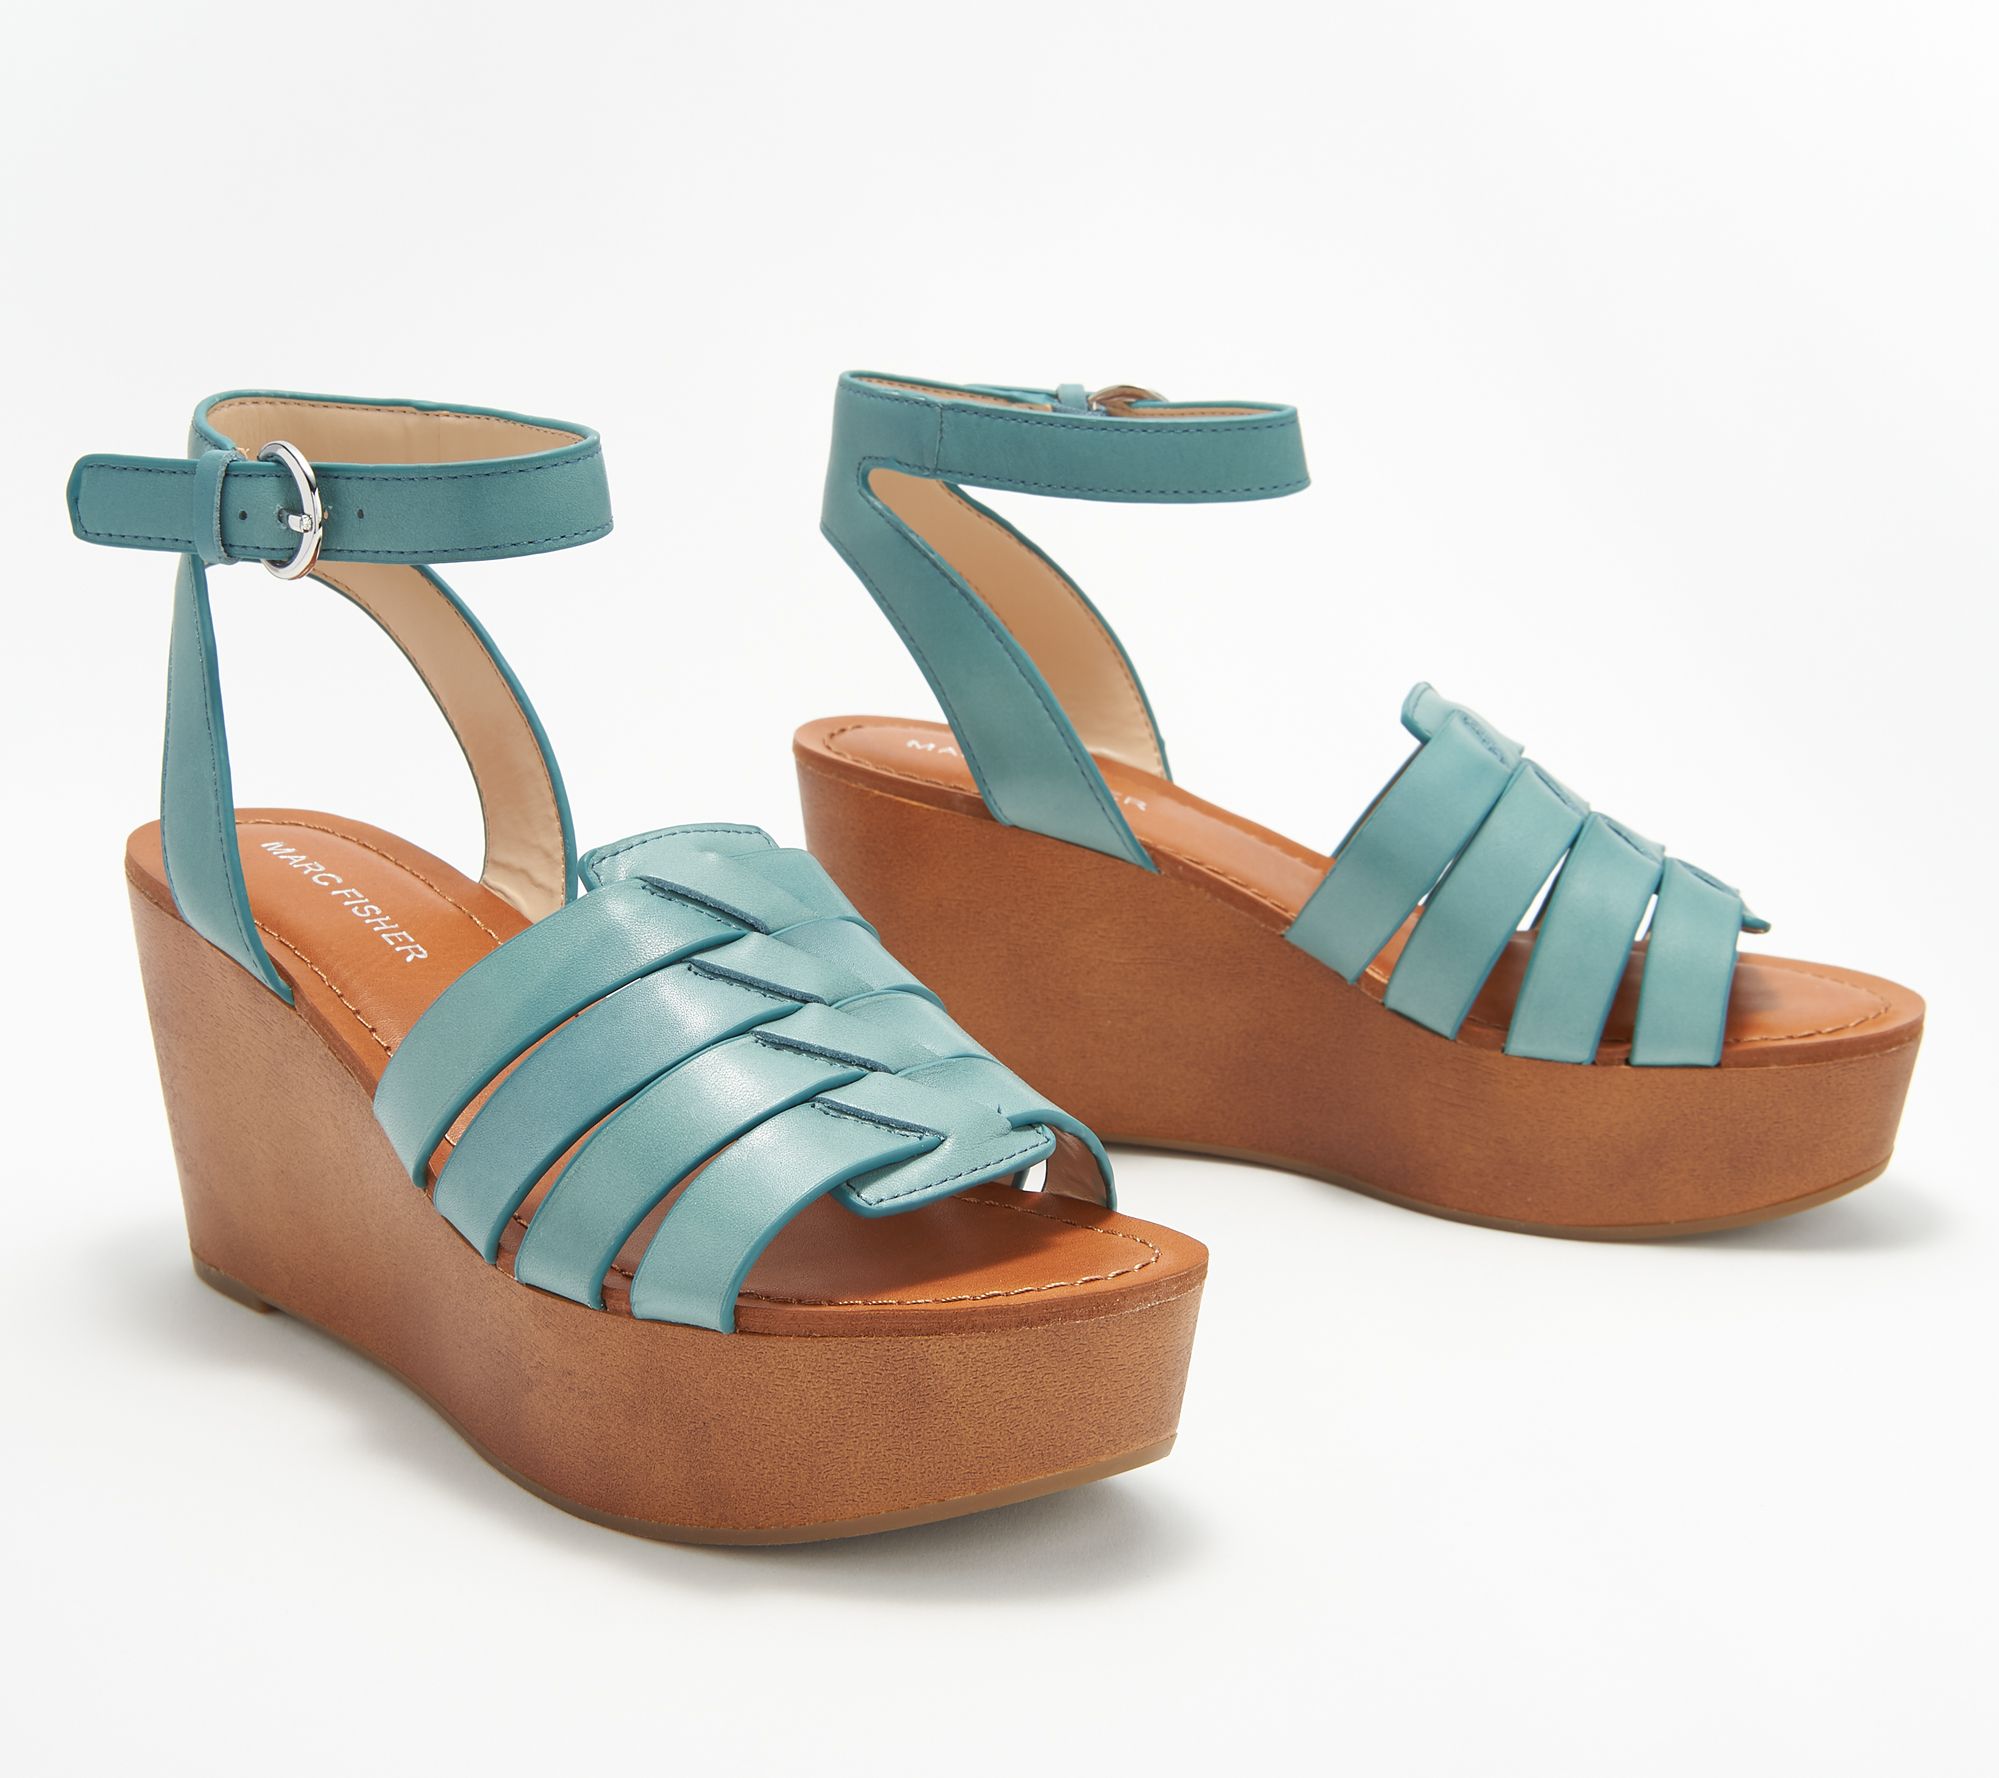 Marc Fisher Woven Leather Wedges with Ankle Strap - Pastya - QVC.com